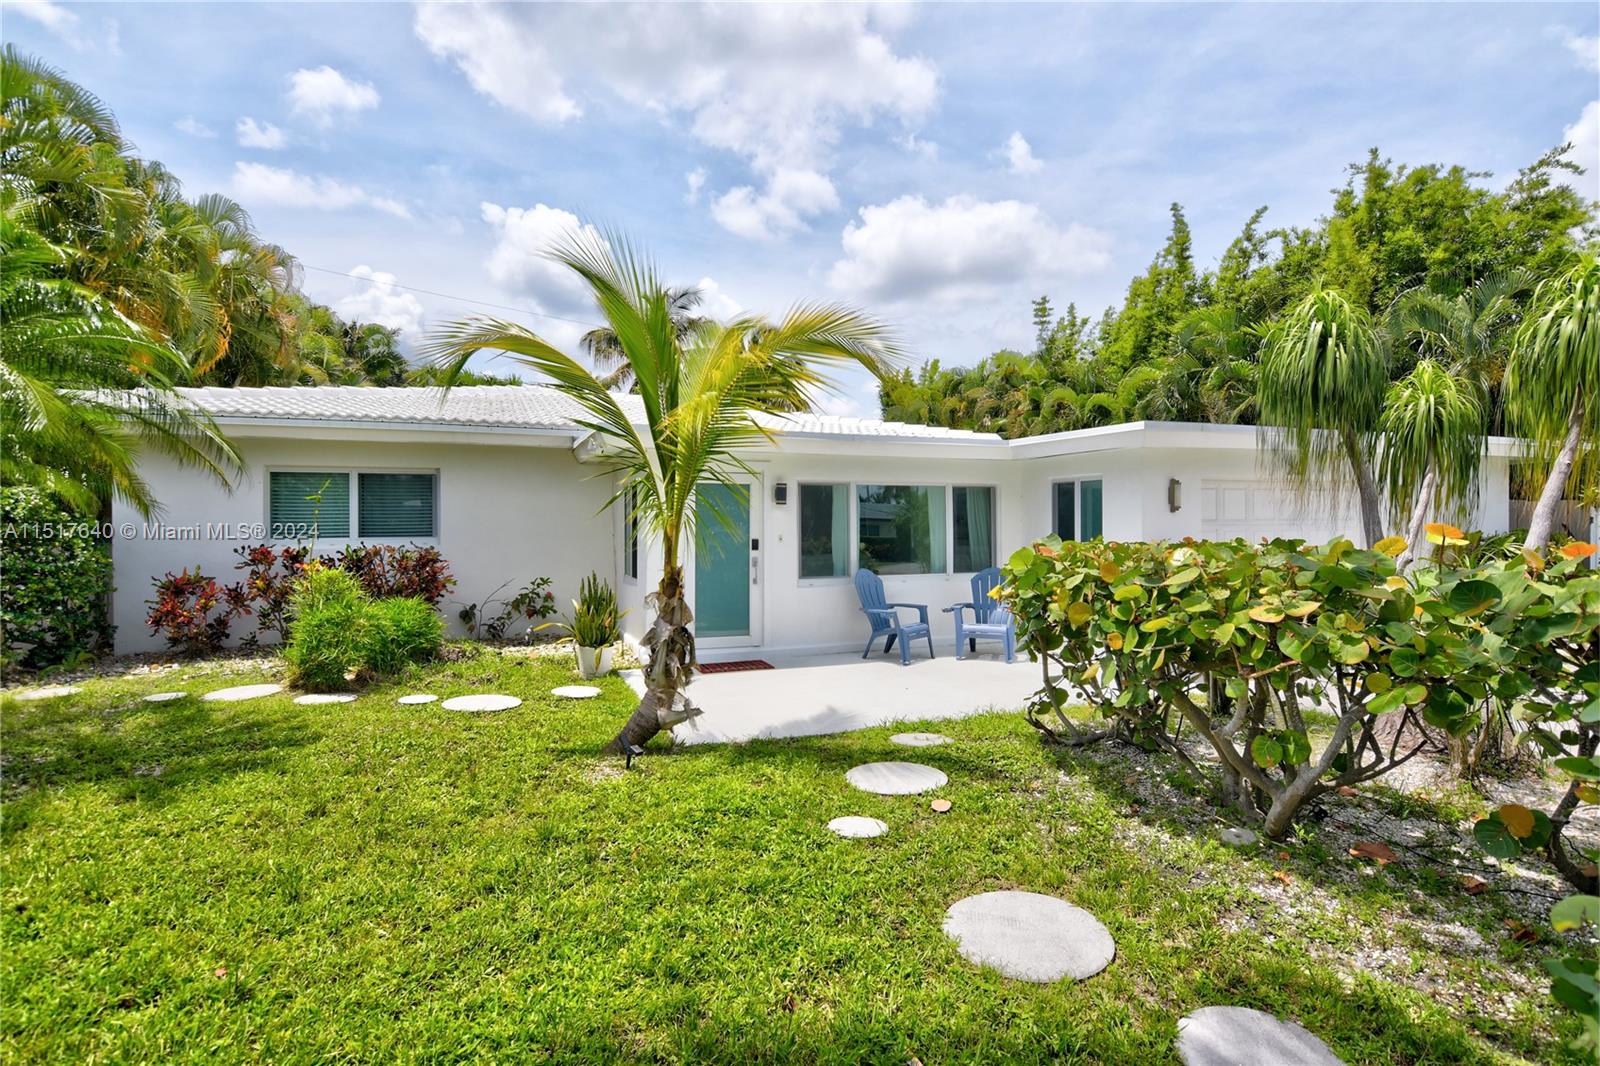 262 Bombay Ave, Lauderdale By The Sea, Florida 33308, 2 Bedrooms Bedrooms, ,3 BathroomsBathrooms,Residentiallease,For Rent,262 Bombay Ave,A11517640